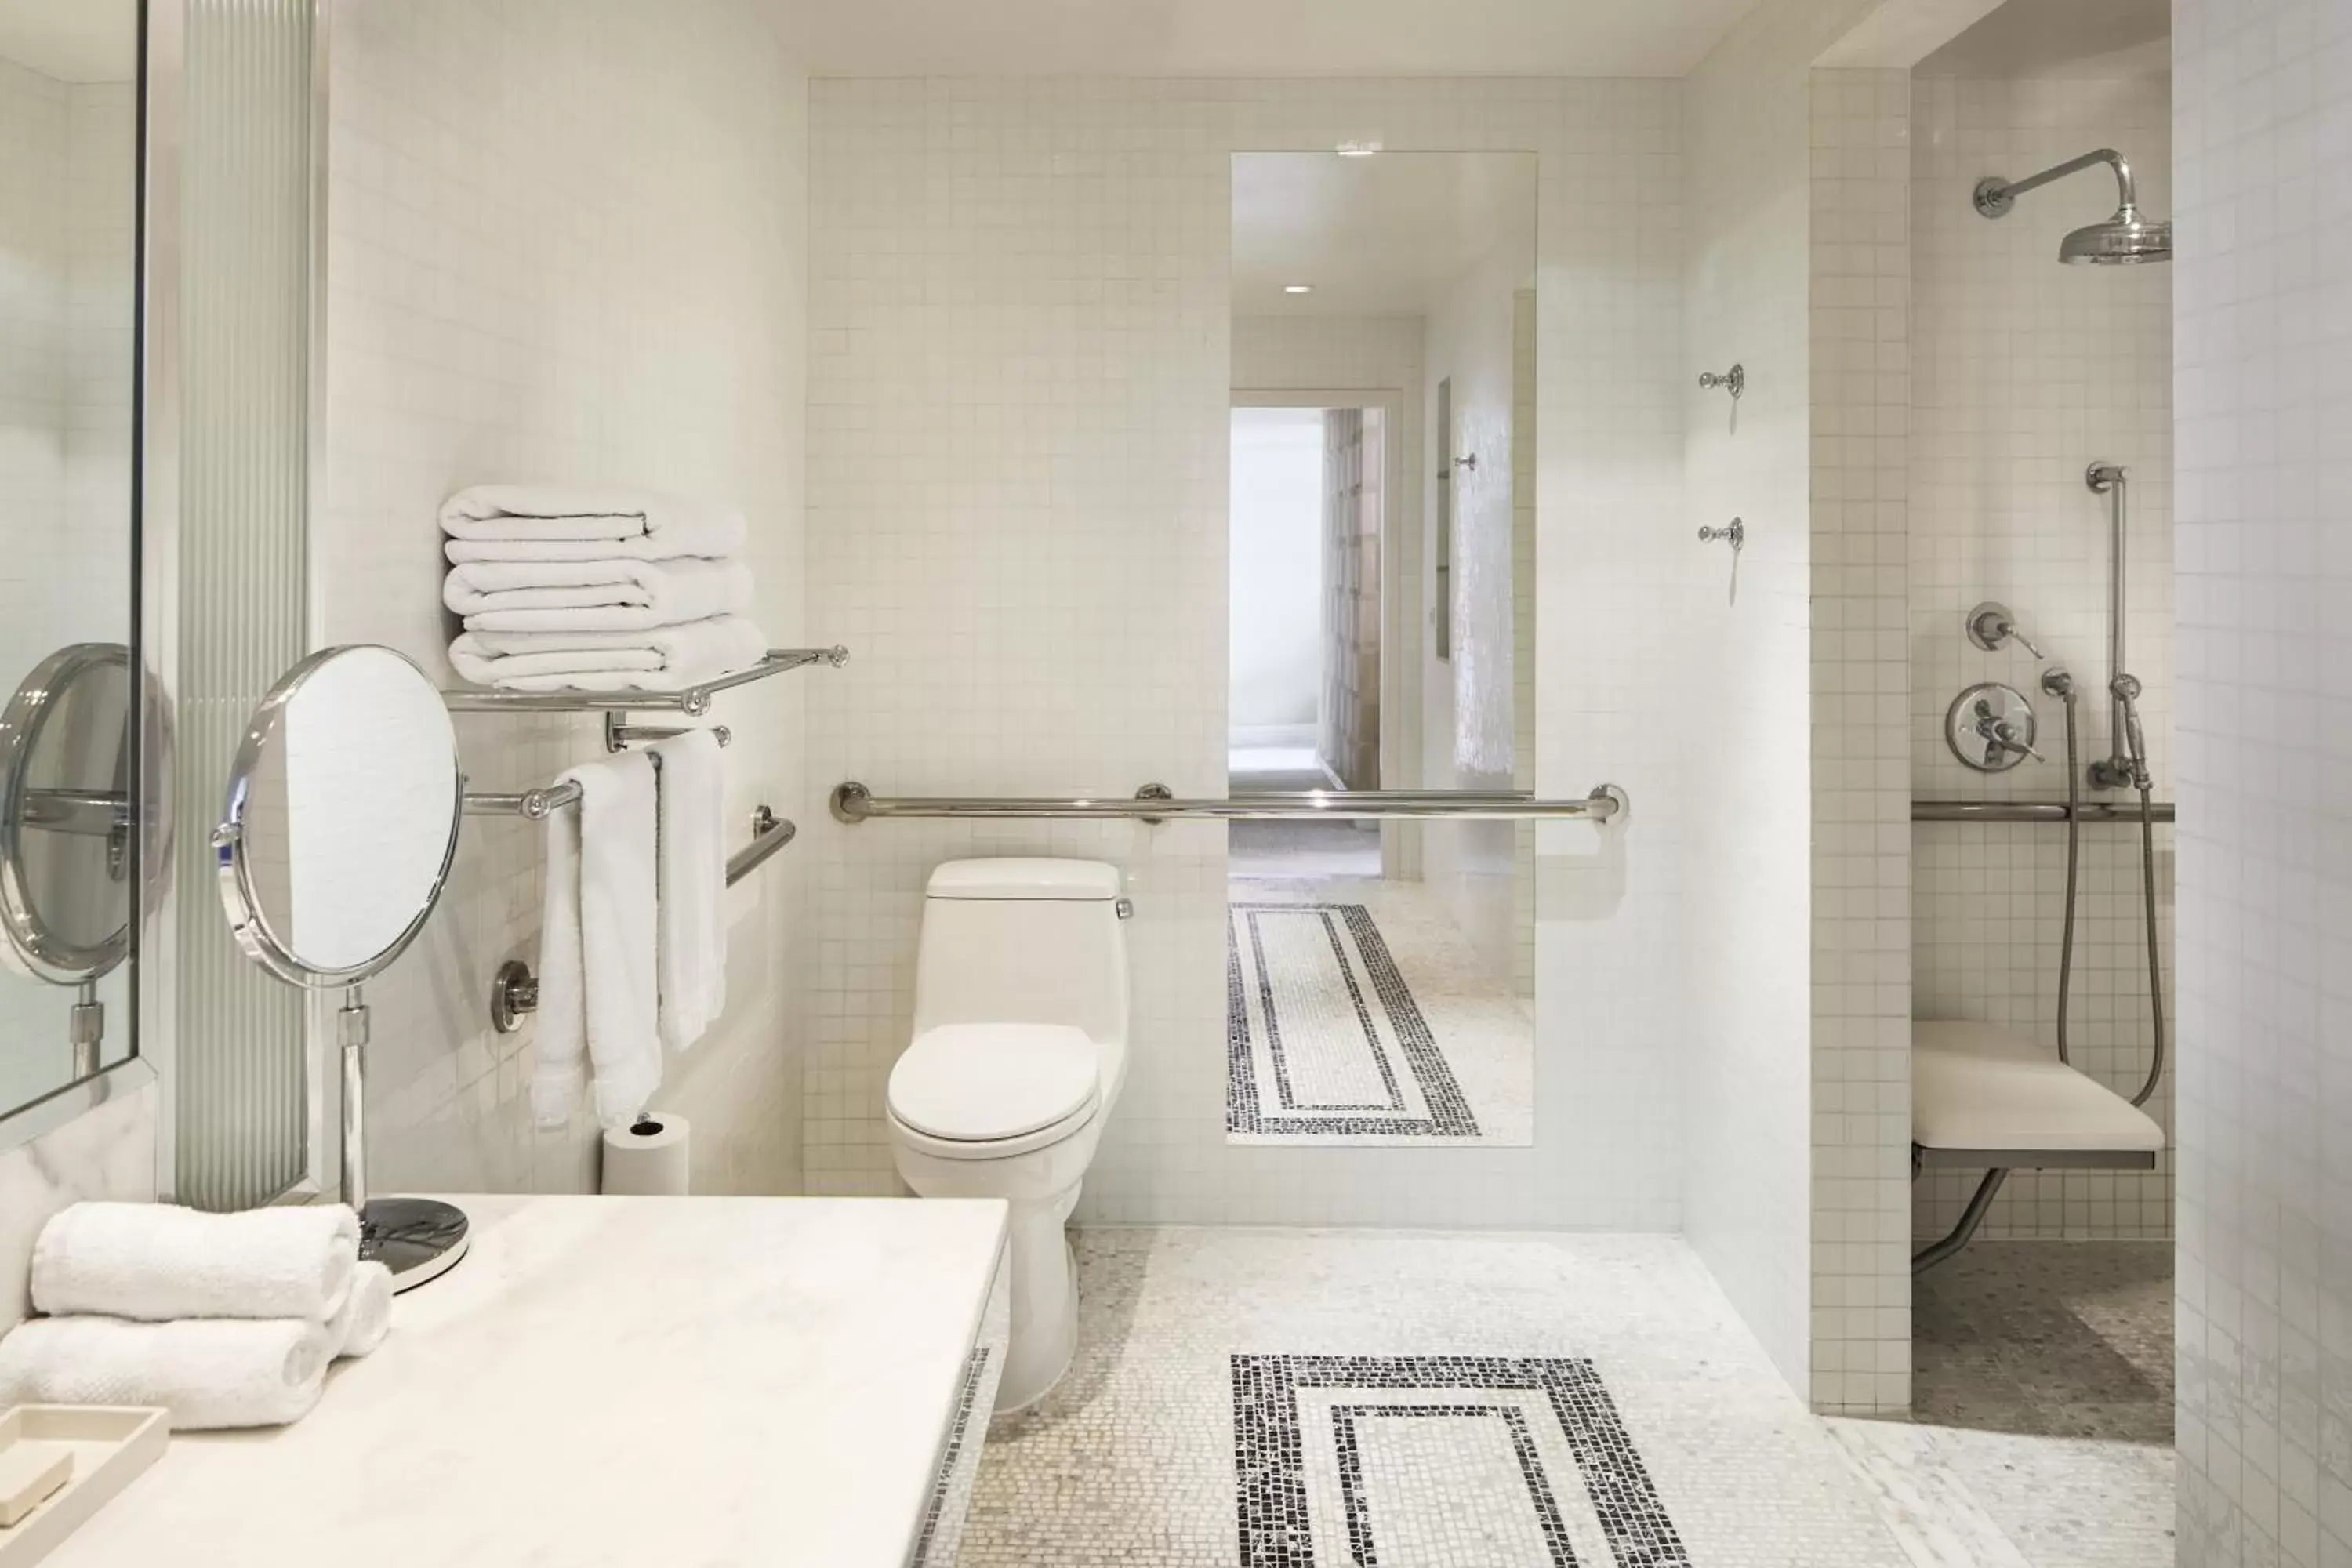 Facility for disabled guests, Bathroom in The London West Hollywood at Beverly Hills